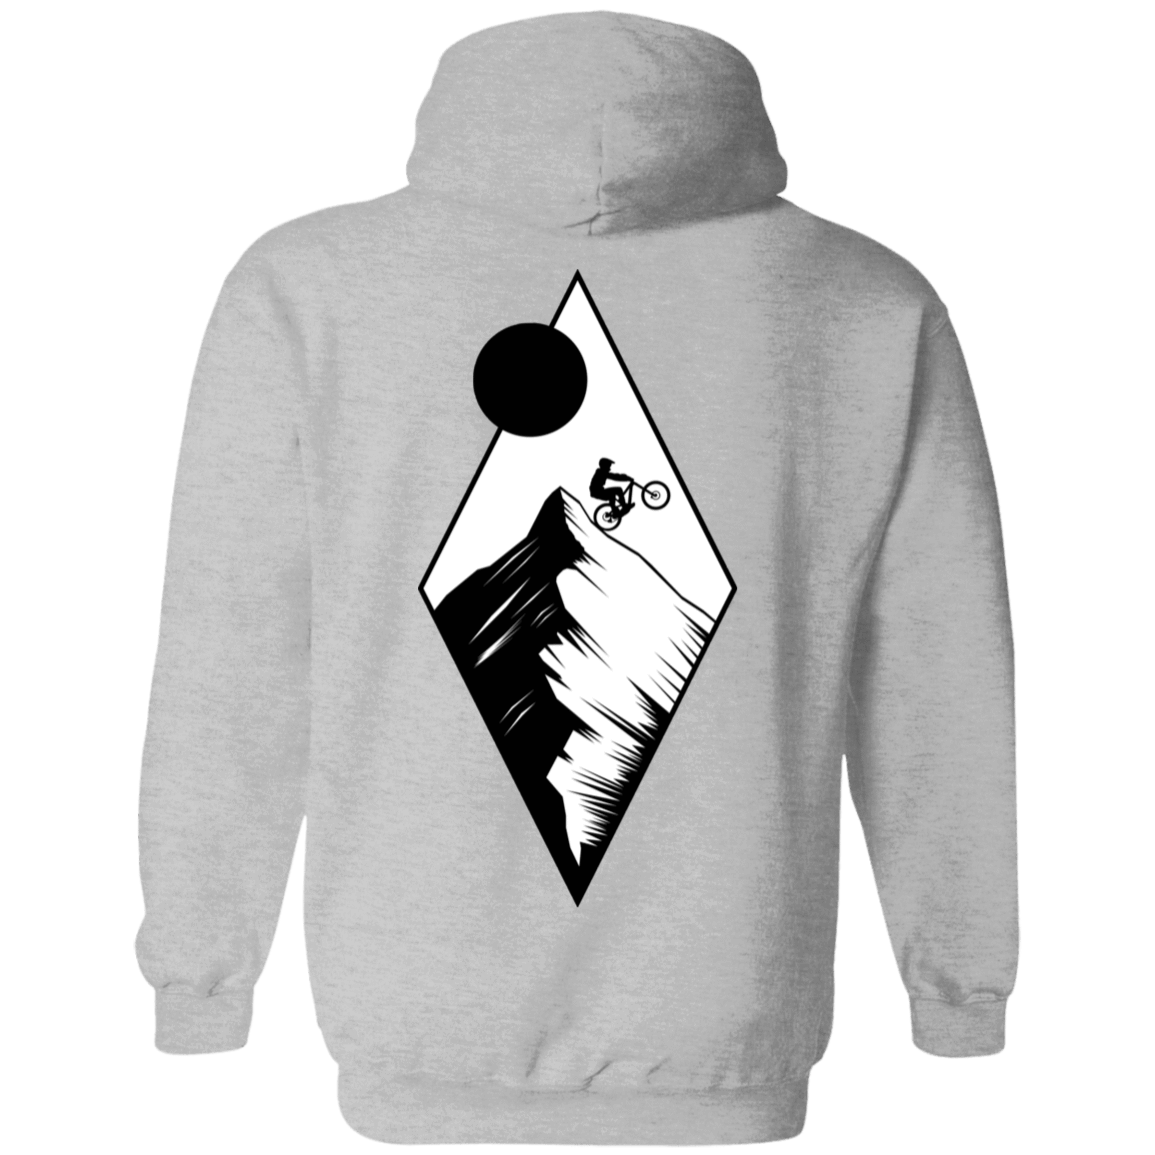 Sweatshirts Sport Grey / S Top Of The Mountain Ride Printed On Back Pullover Hoodie